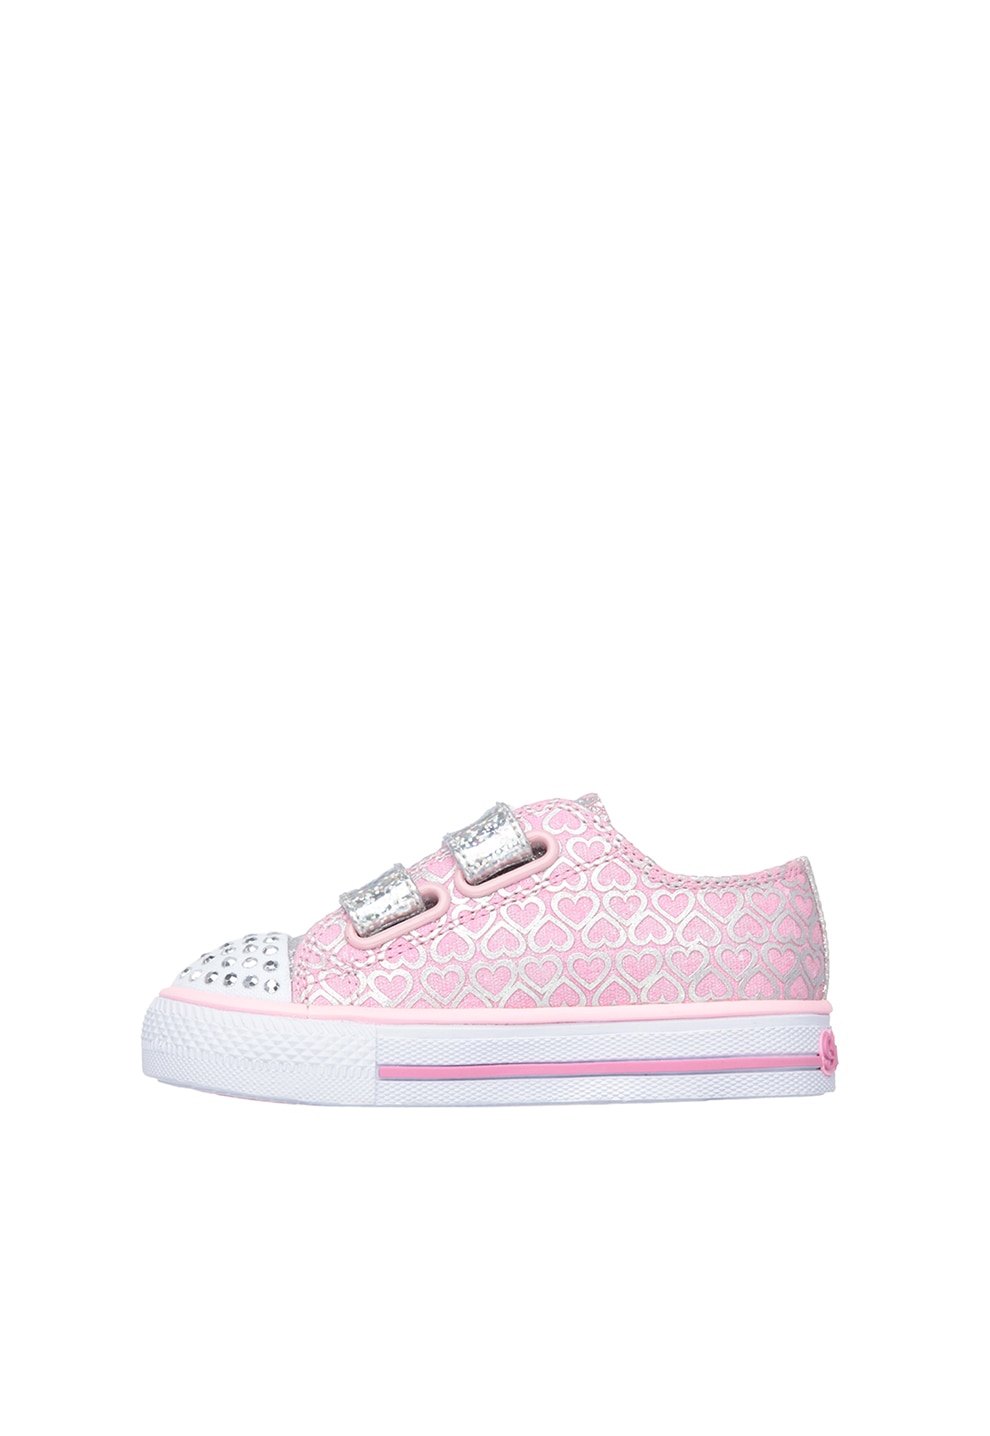 skechers twinkle toes afterpay